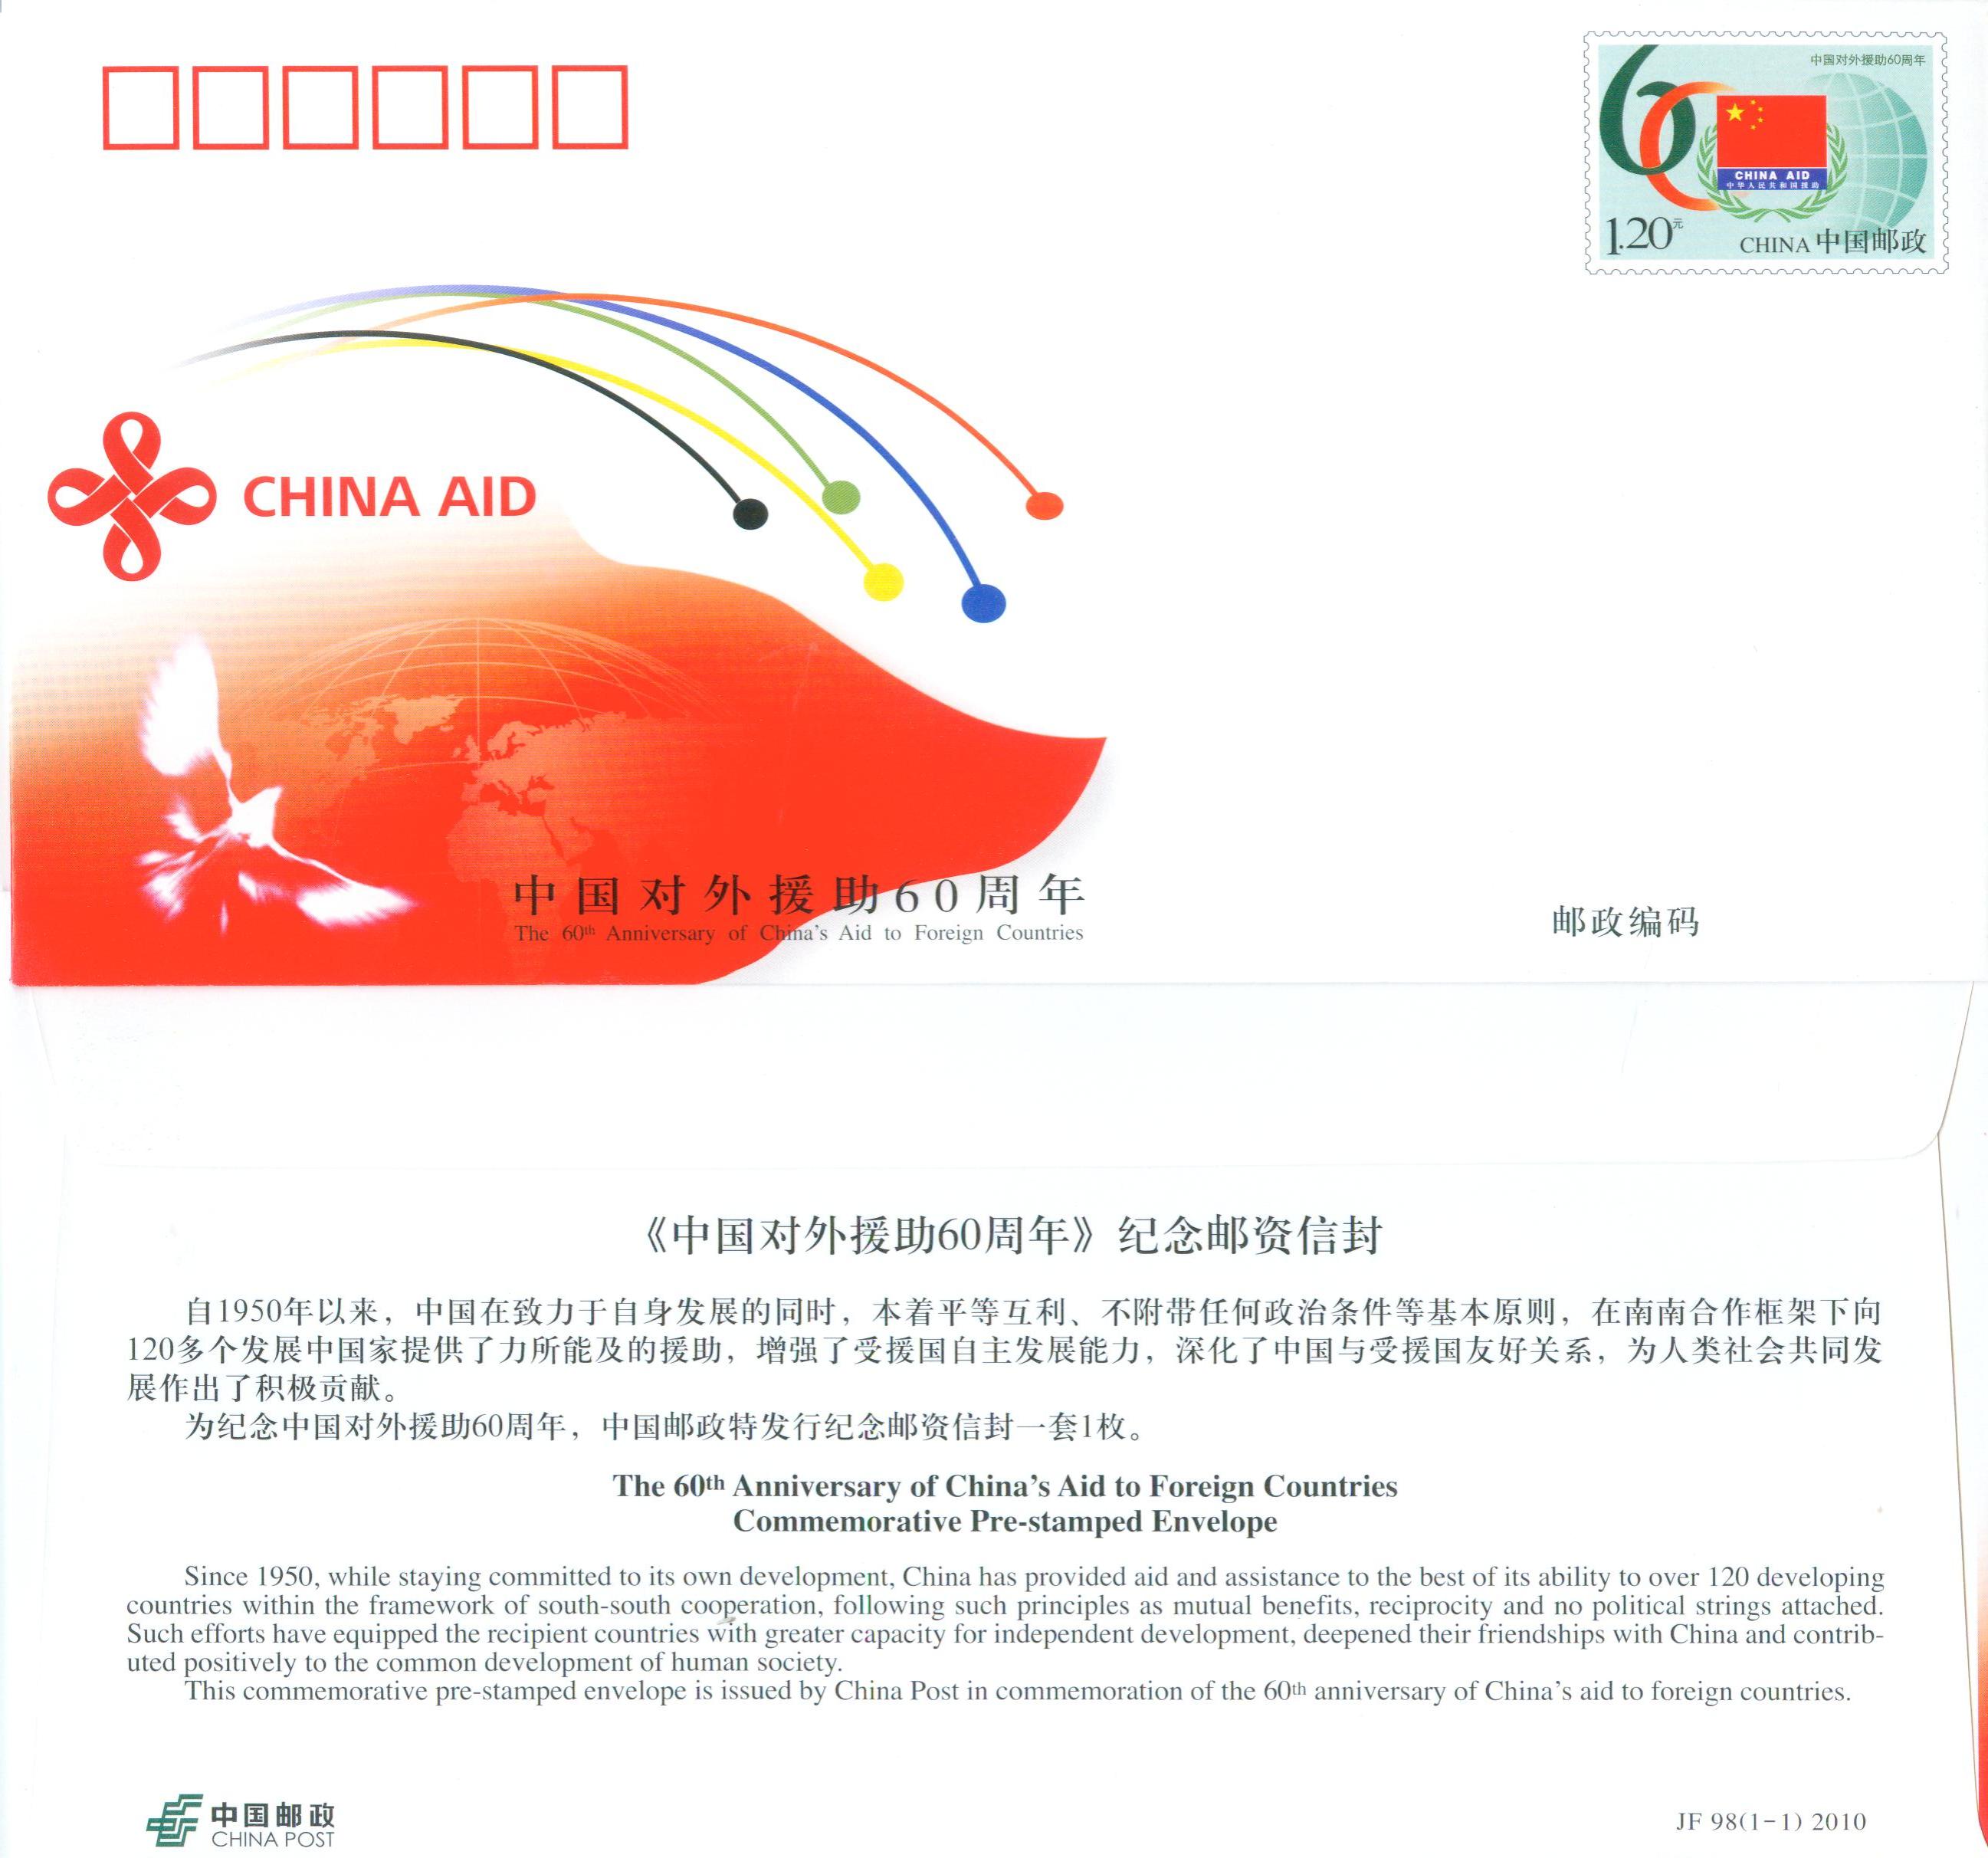 JF98 The 60th Anniversary of China's Aid to Foreign Countries, 2010